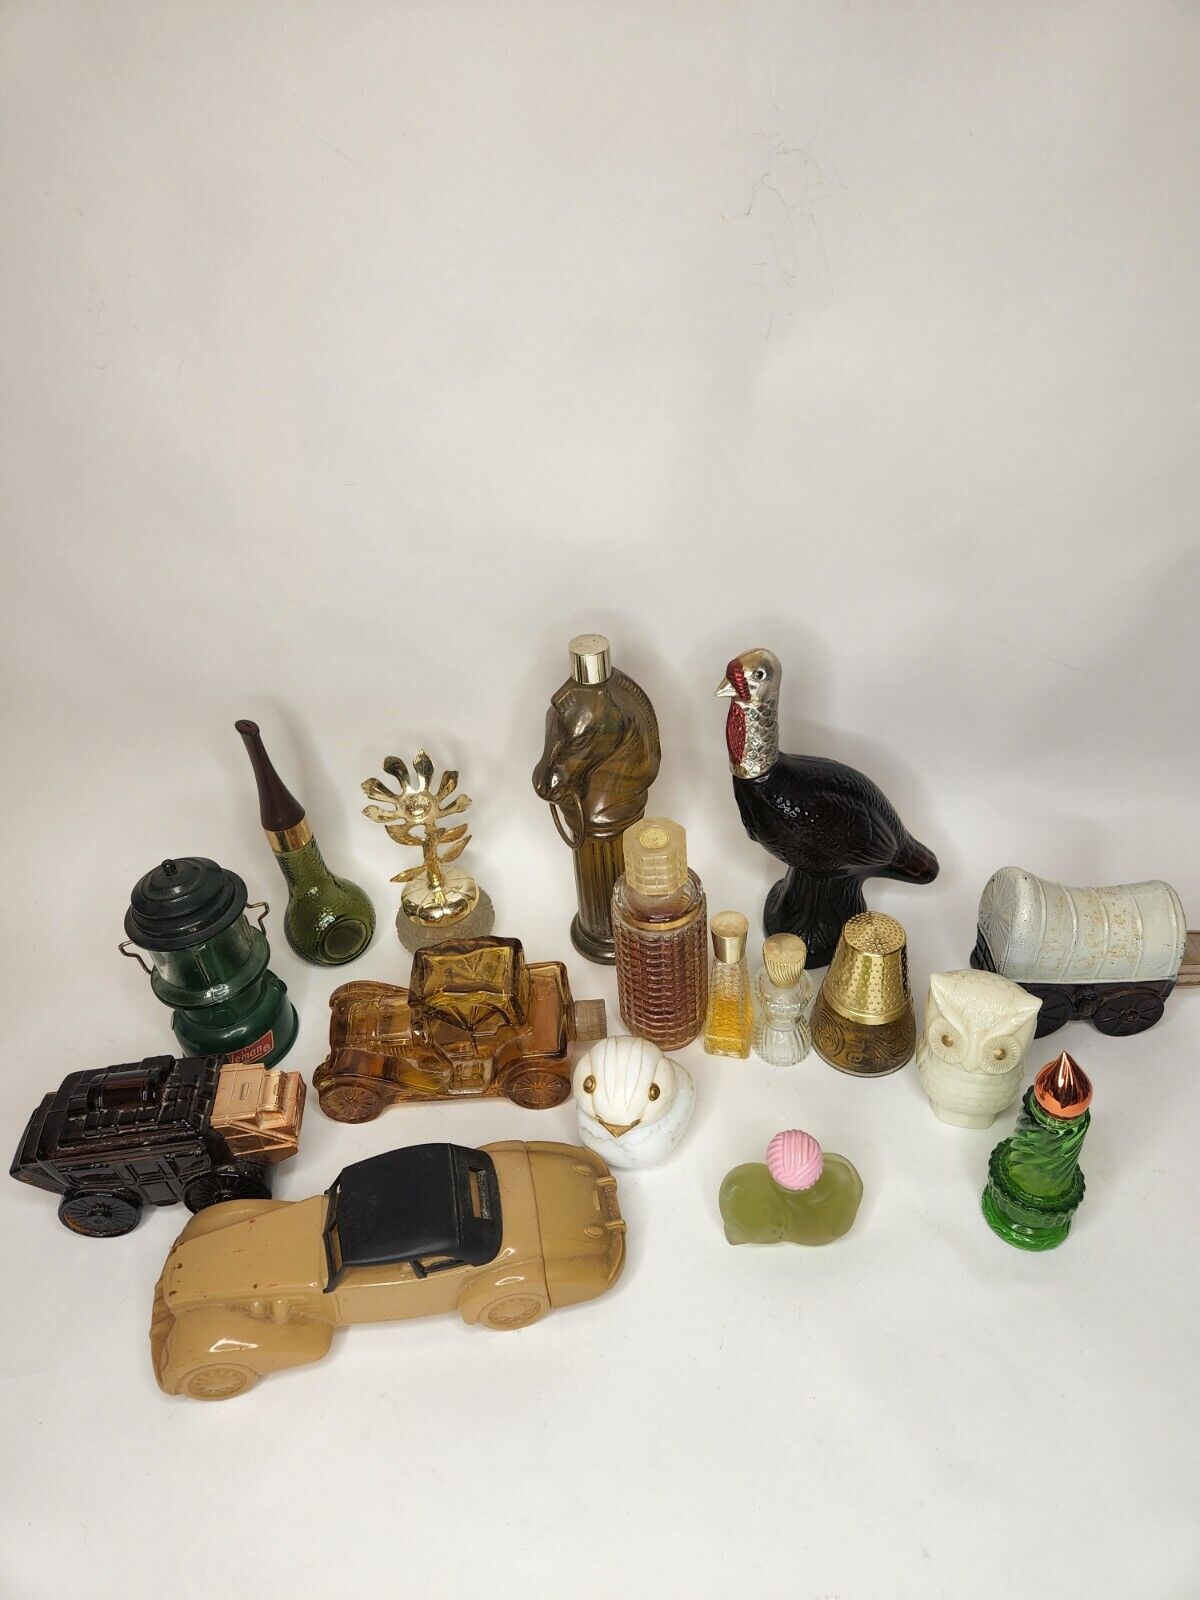 Lot of 17 Avon Vintage Bottles Perfume Cologne After Shave Decanter Free Gifts